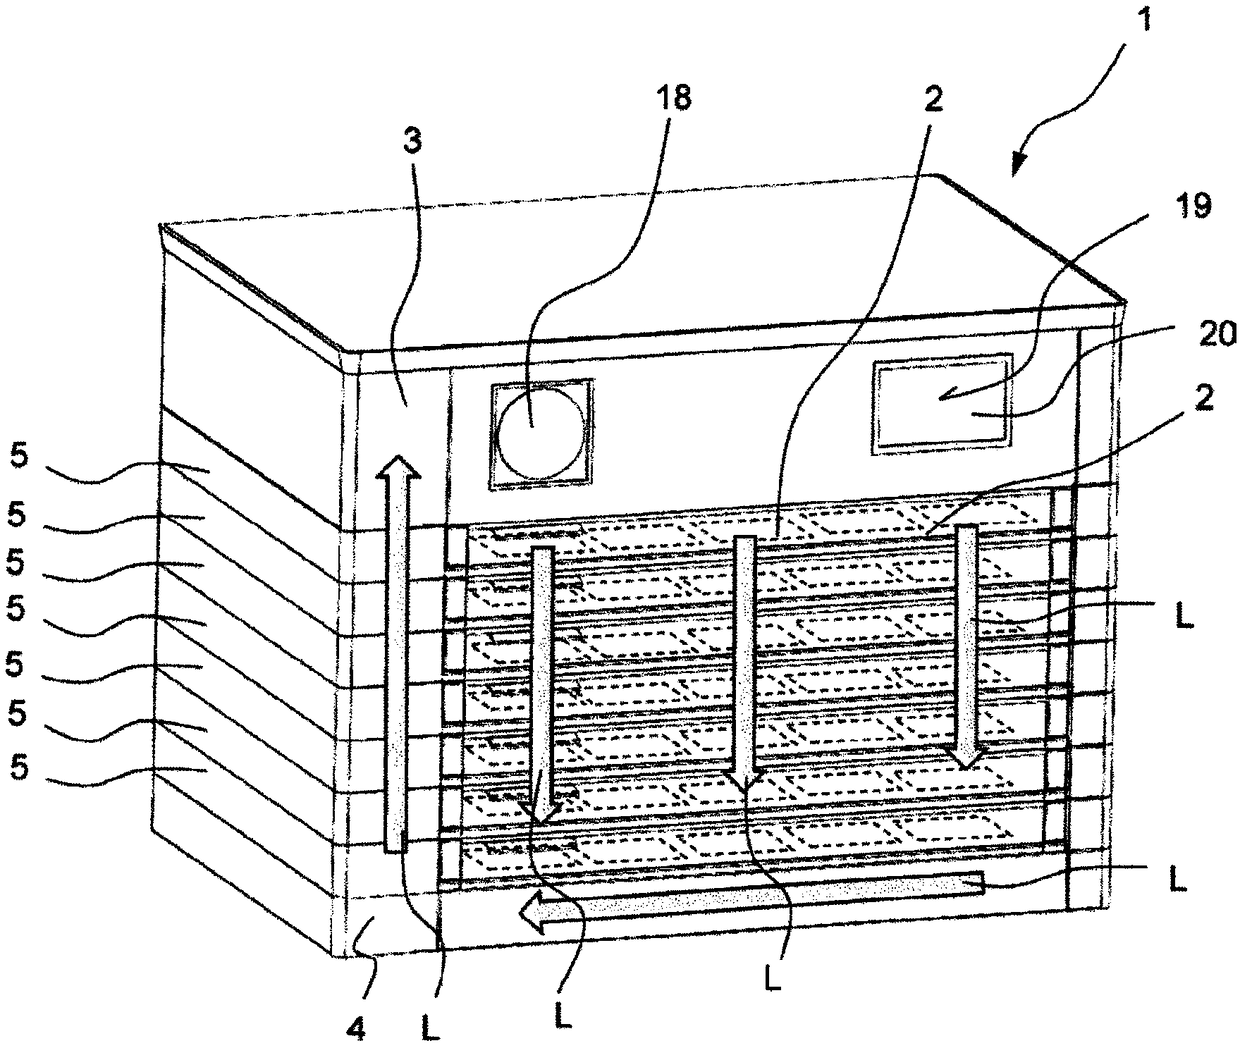 Modular blood product storage system for temperature-regulated storage of blood products